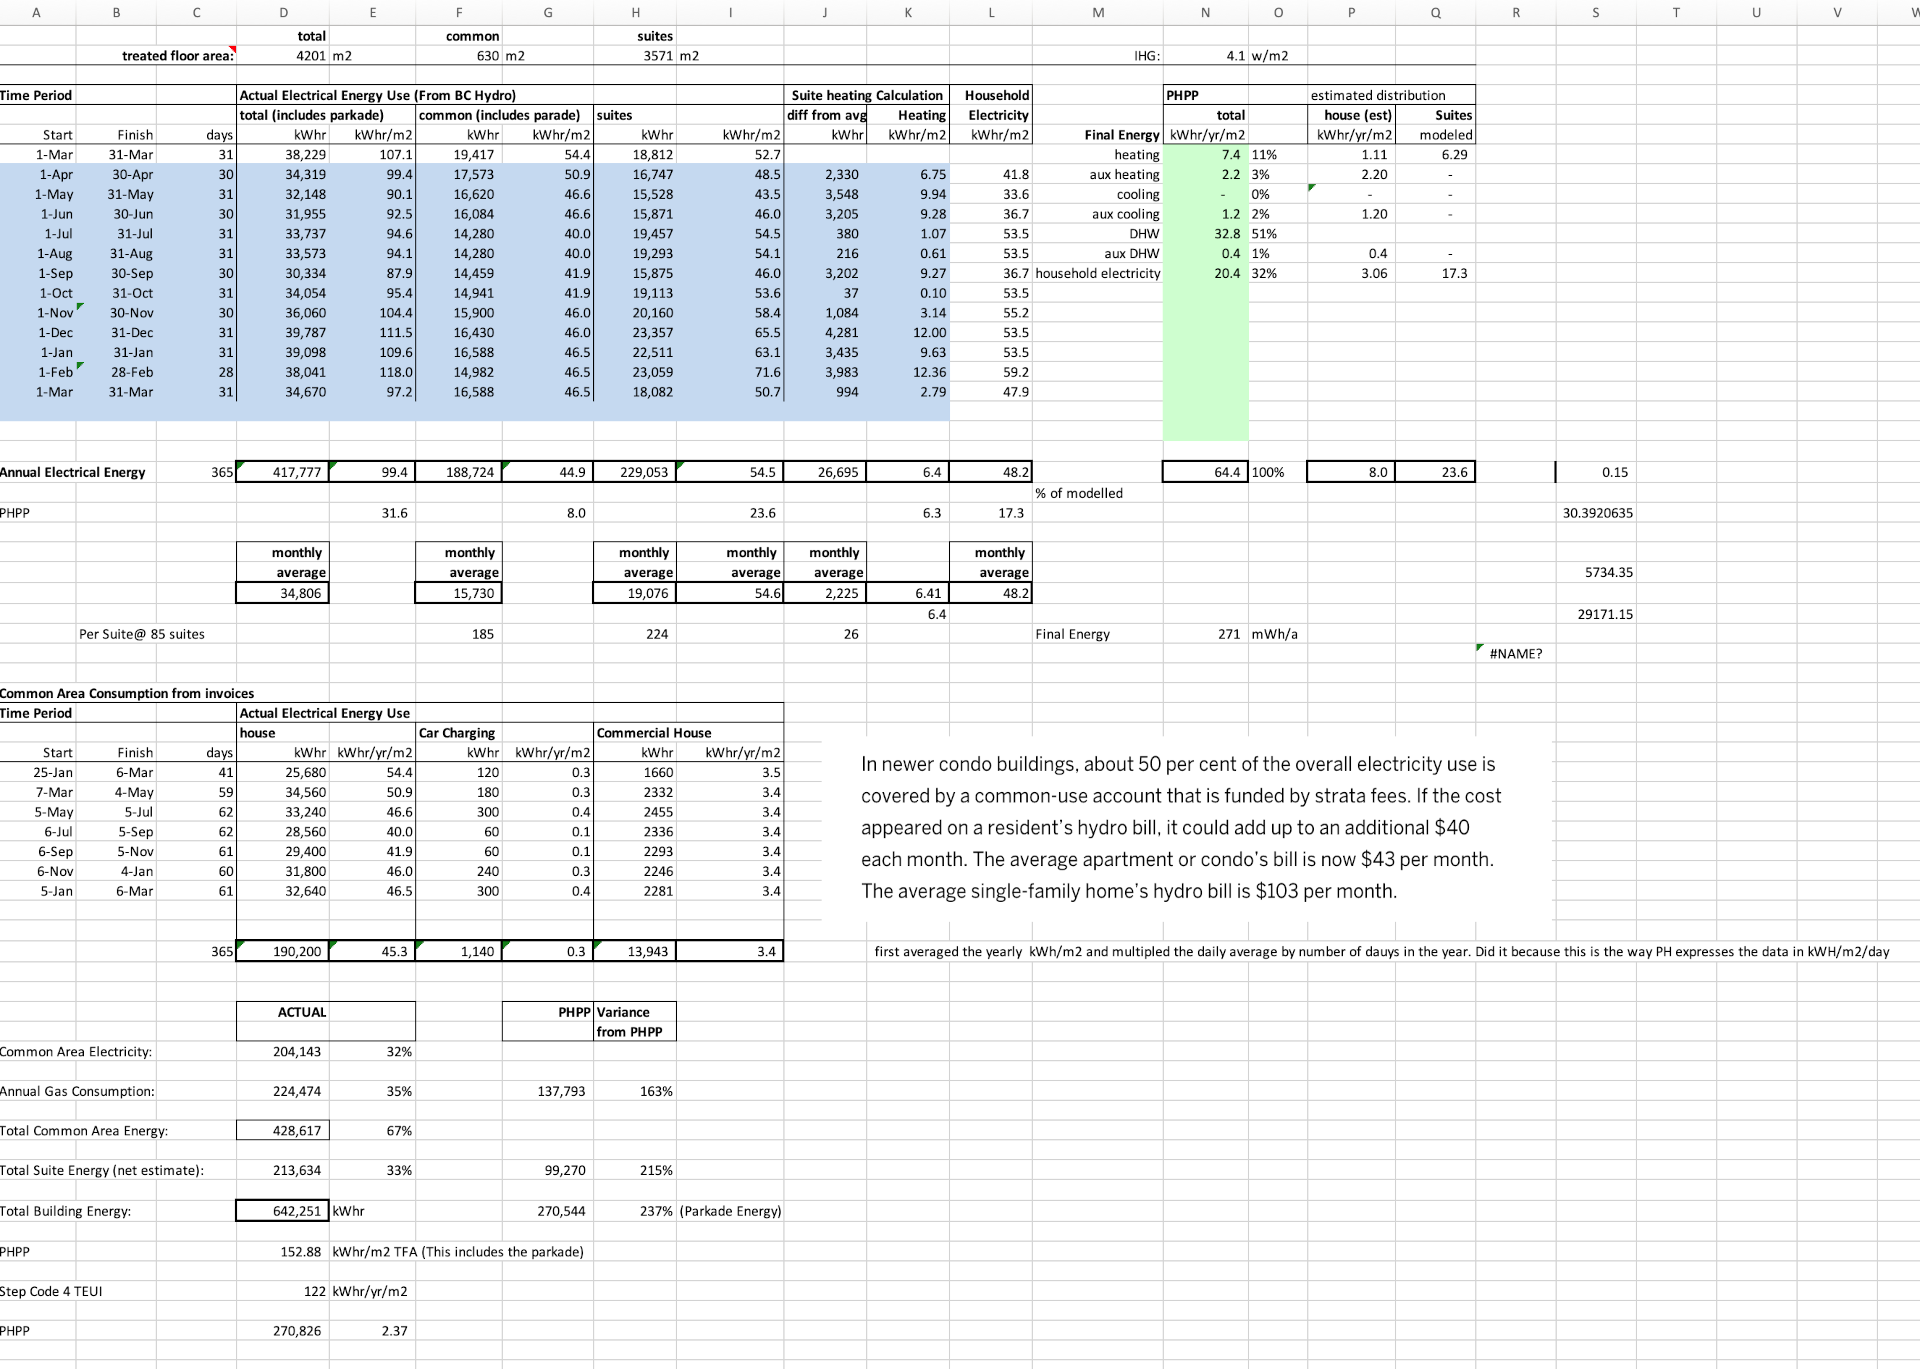 An example spreadsheet (shared with permission of Cornerstone Architects) showing various "rich" table features that our participants employed, including (1) A Master Table of base data that is often left untouched, with manipulations happening in a copy or other area separate from the base data; (2) Marginalia such as comments or derived rows or columns in the periphery of the base table, often taking the form of freeform natural language comments; (3) Annotations such as highlighting or characters with specific meaning (e.g., a dash denotes missing values) to flag particular cells as anomalous or requiring action; and (4) Multi-cell features such as labels or even data that span multiple rows or columns of the sheet.